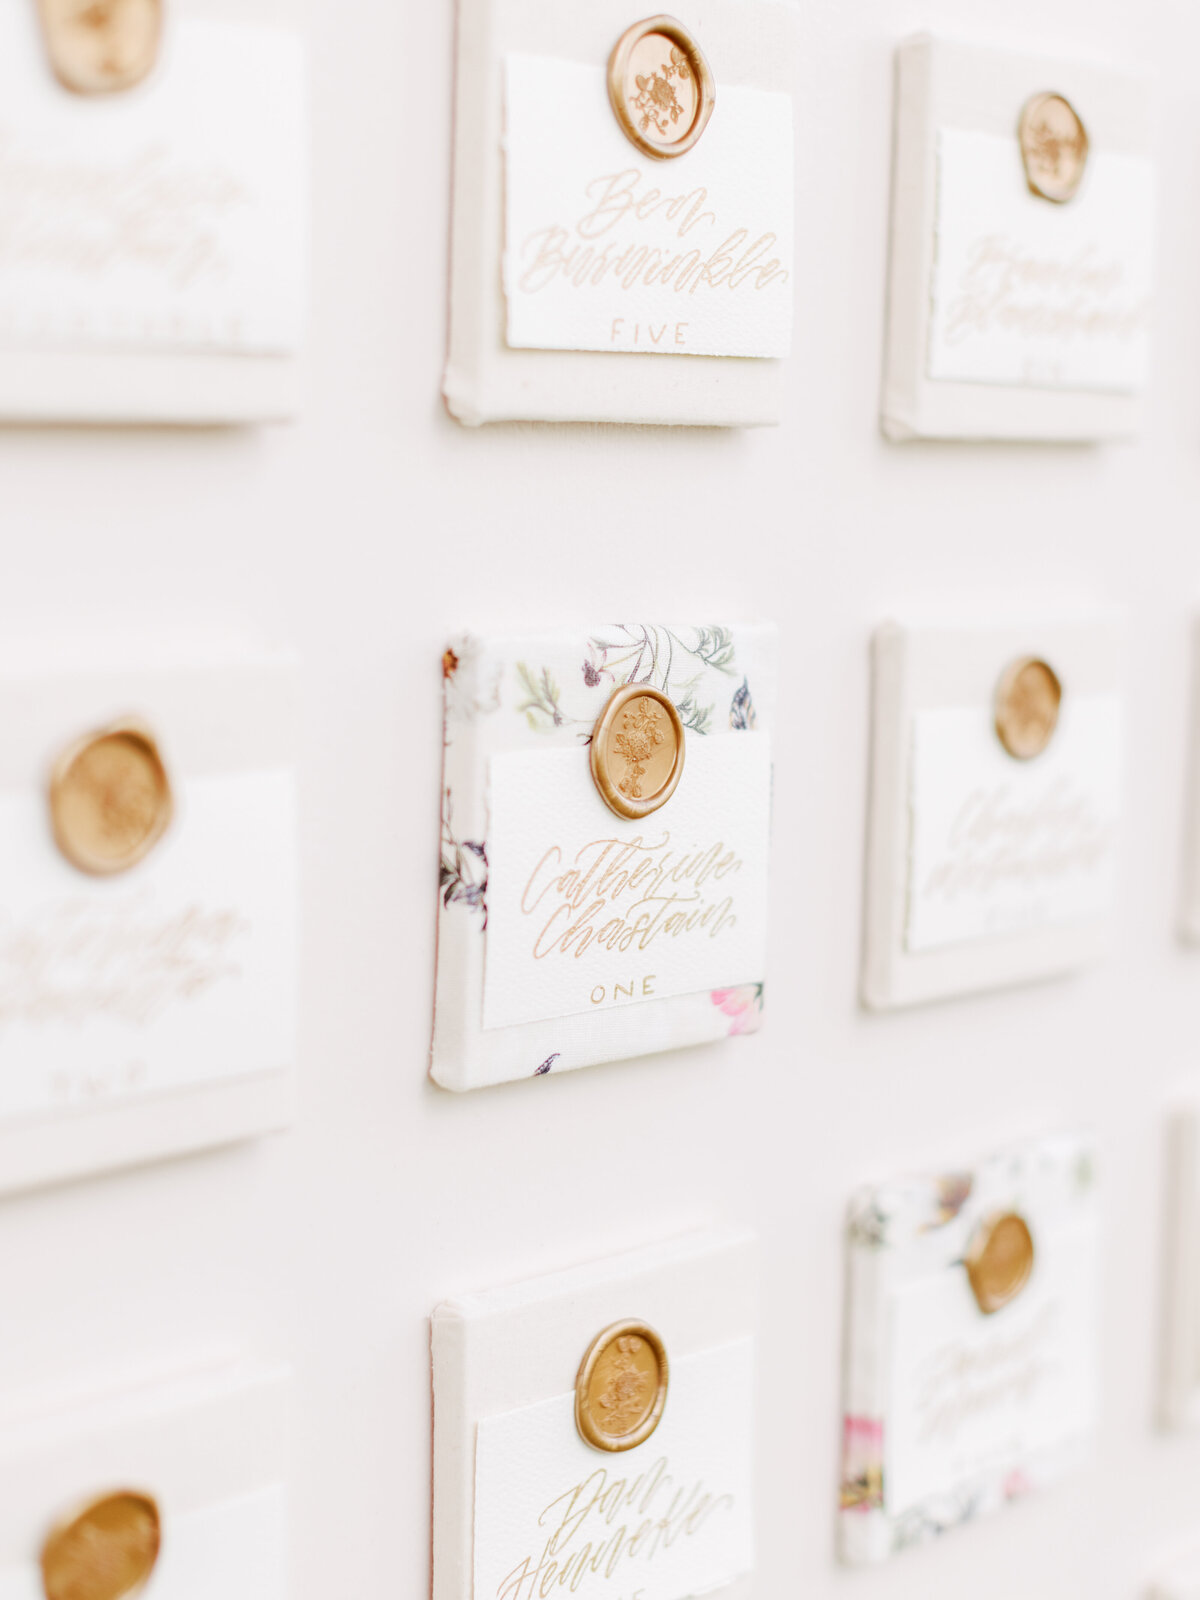 LBV Design House Wedding Design Planning Day-Of Signage Paper Goods Shoppable Accessories Wedding Day Austin, Texas beyond Valerie Strenk Lettered by Valerie Hand Lettering10